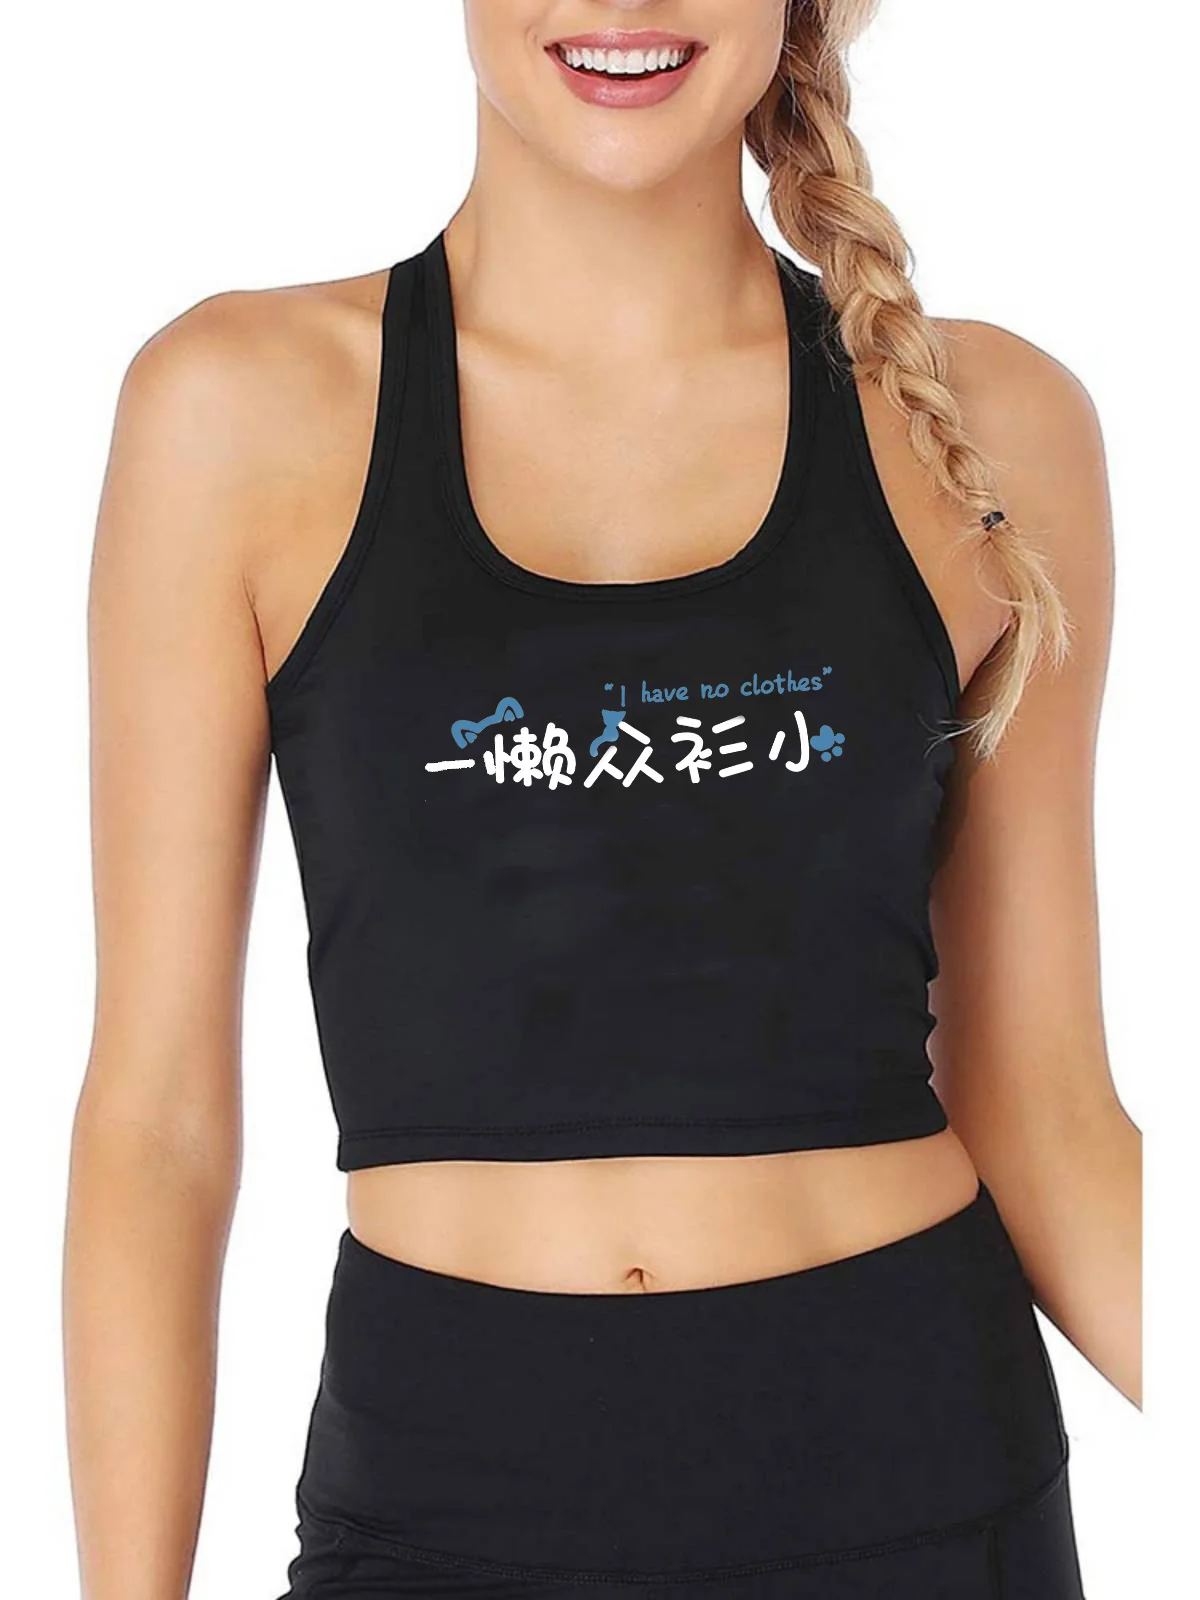 

I Have No Clothes Amusing Chinese Idioms Design Tank Top Women's Breathable Slim Fit Crop Tops Gym Vest Summer Camisole